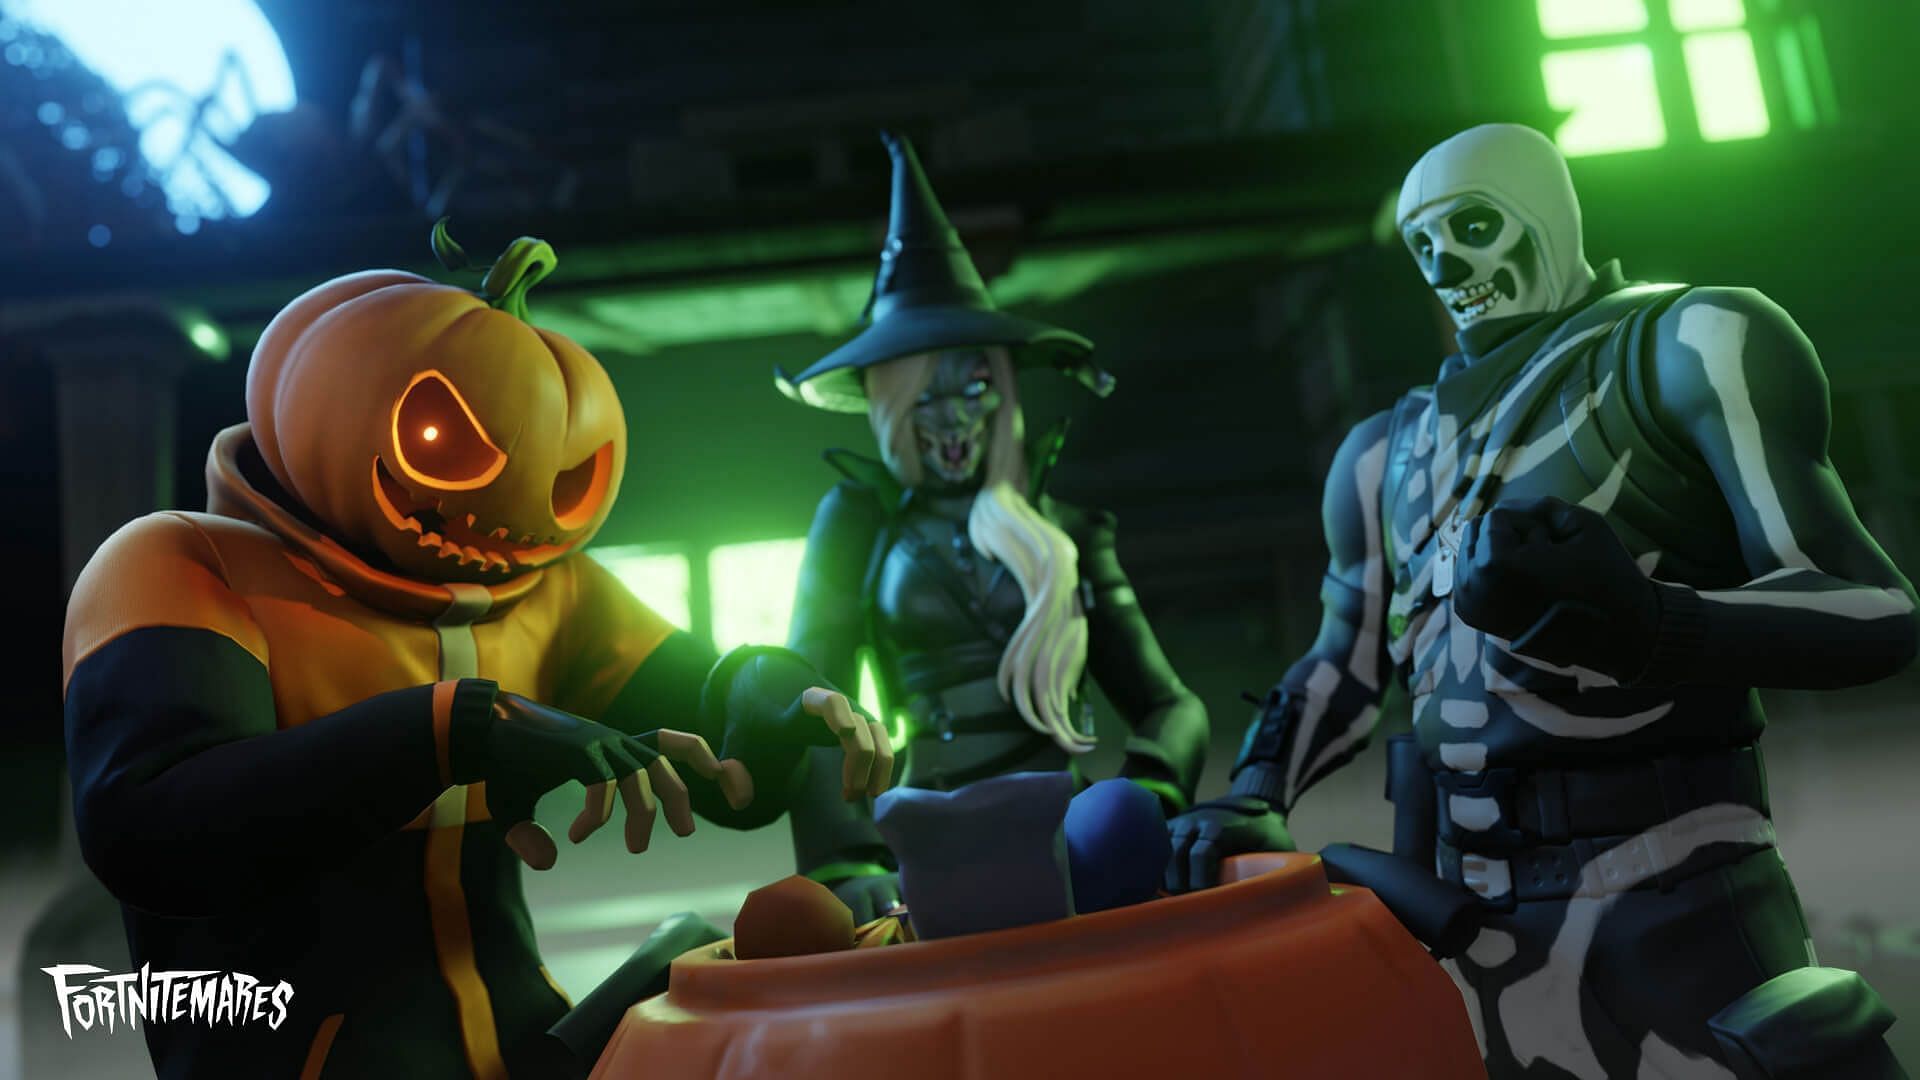 Two new skins have been confirmed for FortniteMares 2022